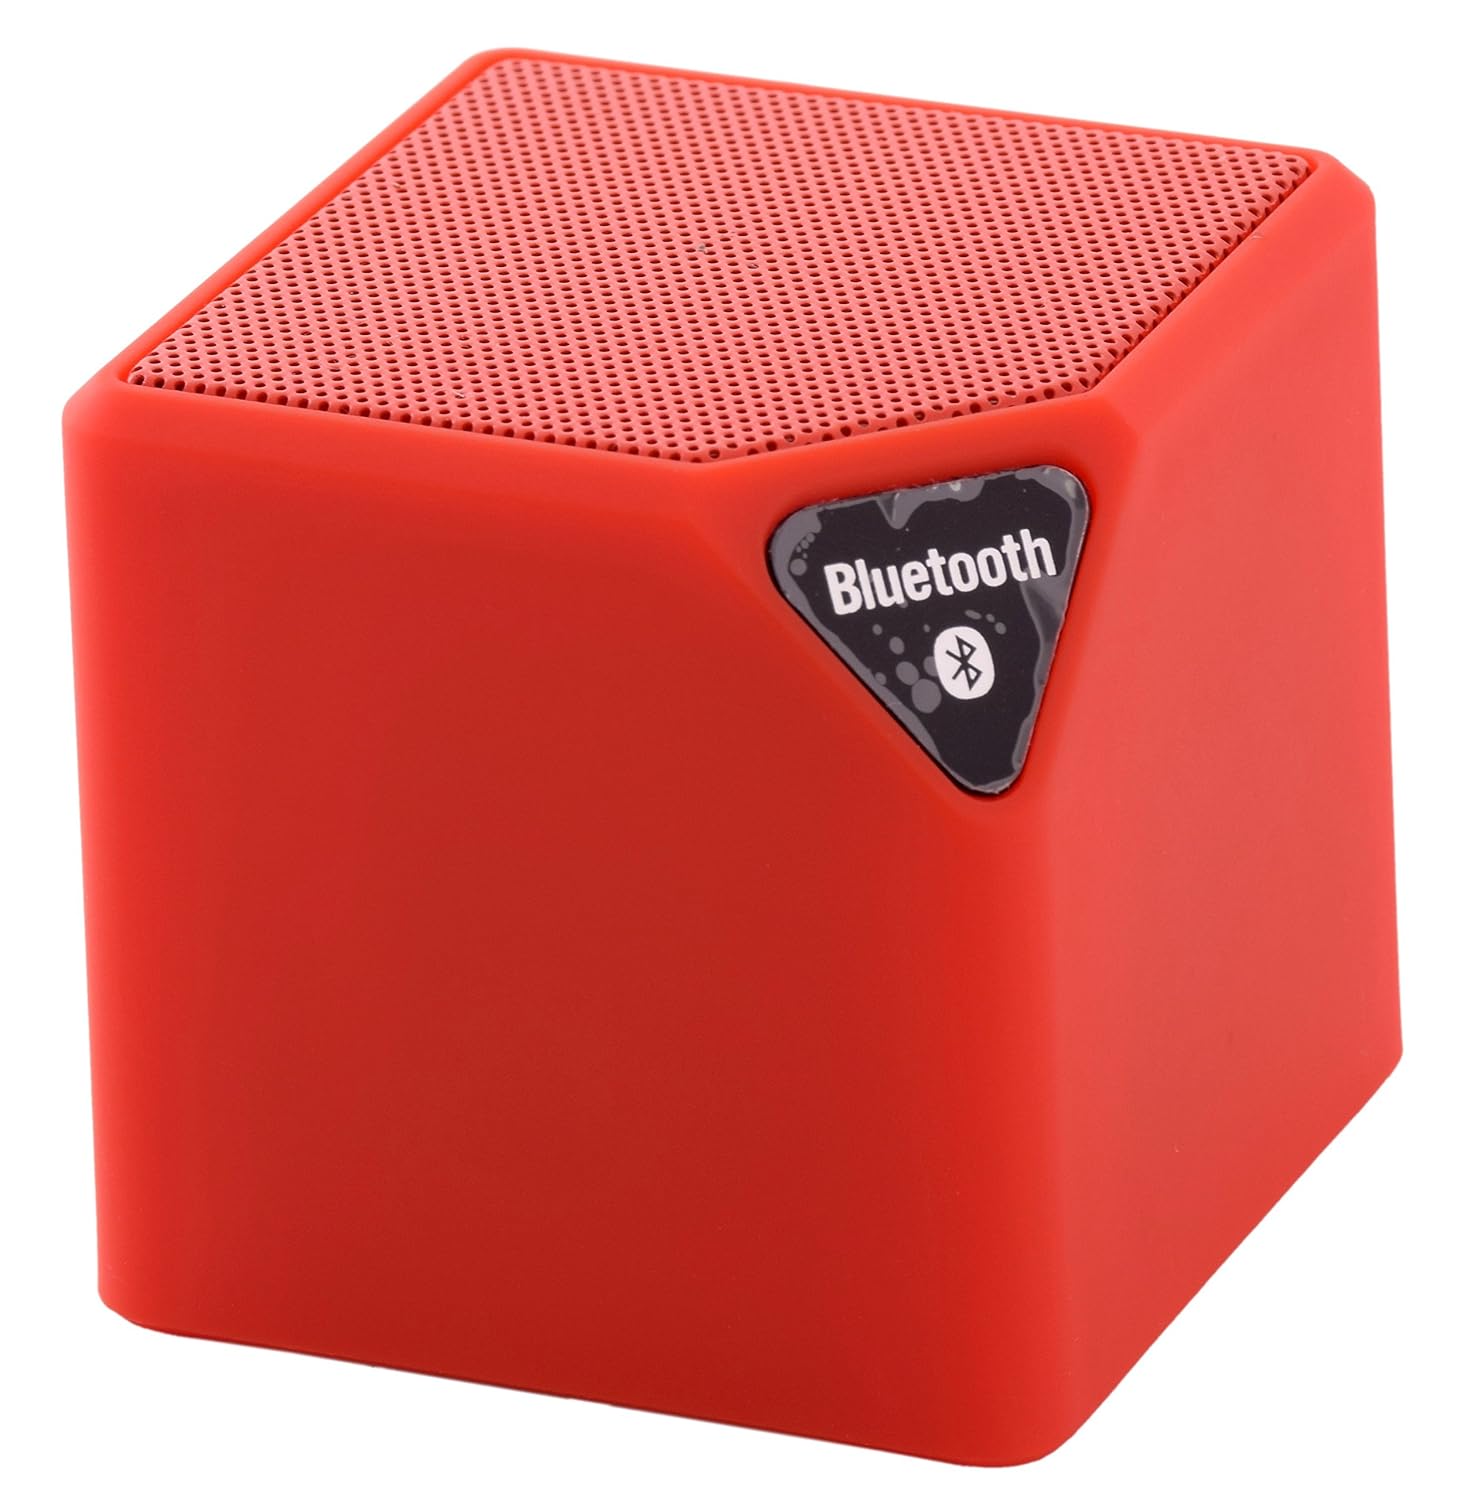 Speaker with a red X